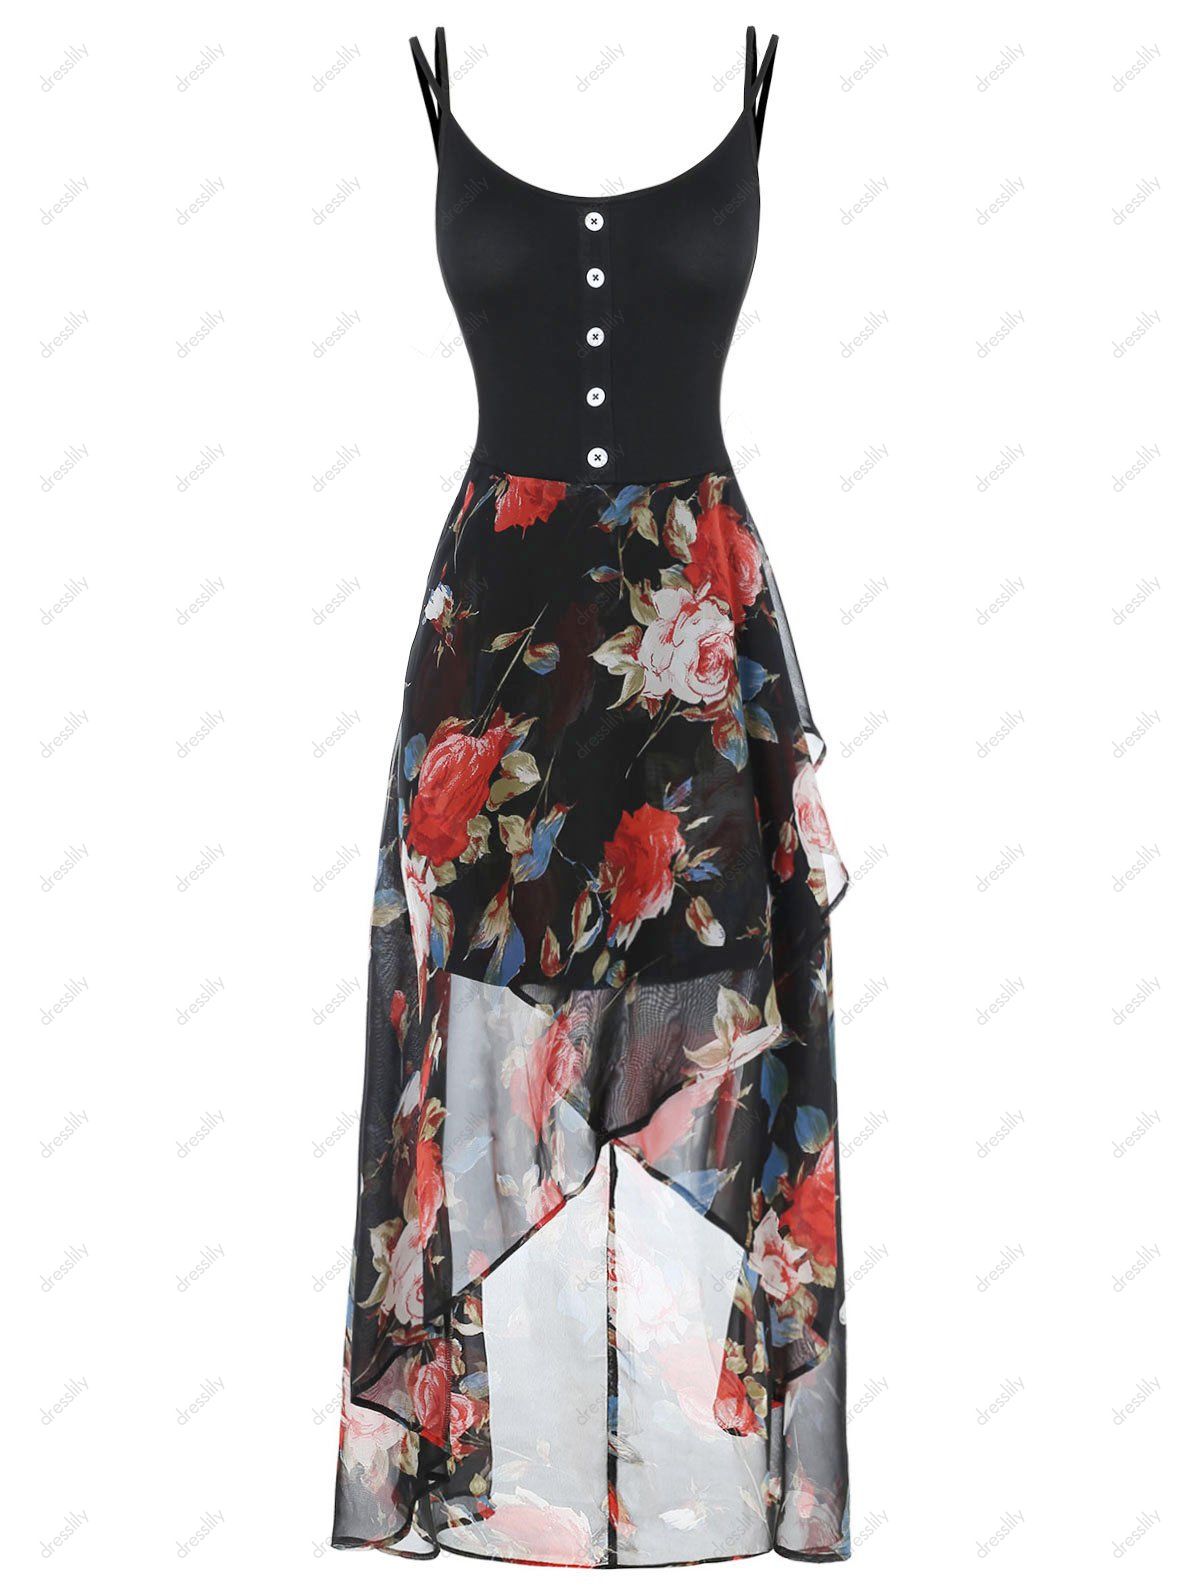 DressLily.com: Photo Gallery - Plus Size Floral Overlay High Low Dress